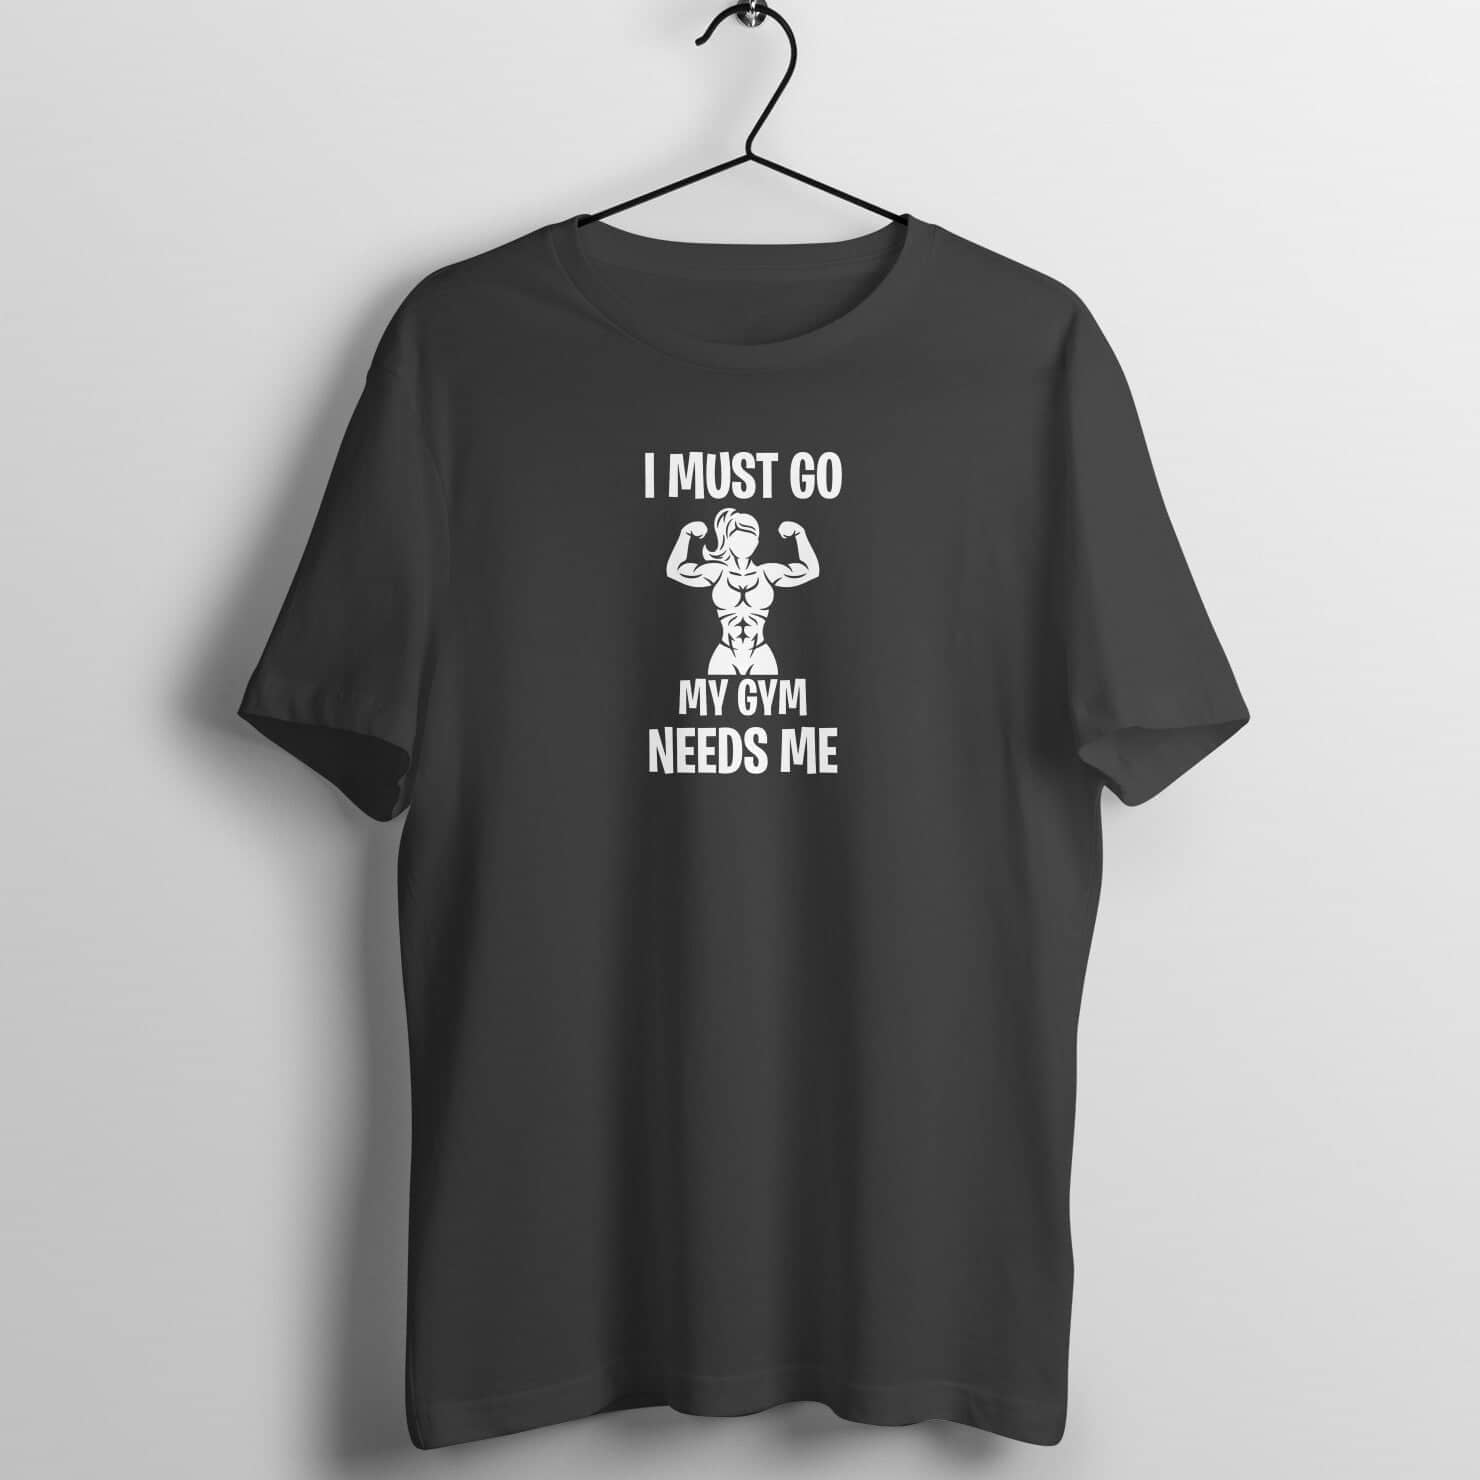 I Must Go to the Gym Exclusive Workout T Shirt for Women